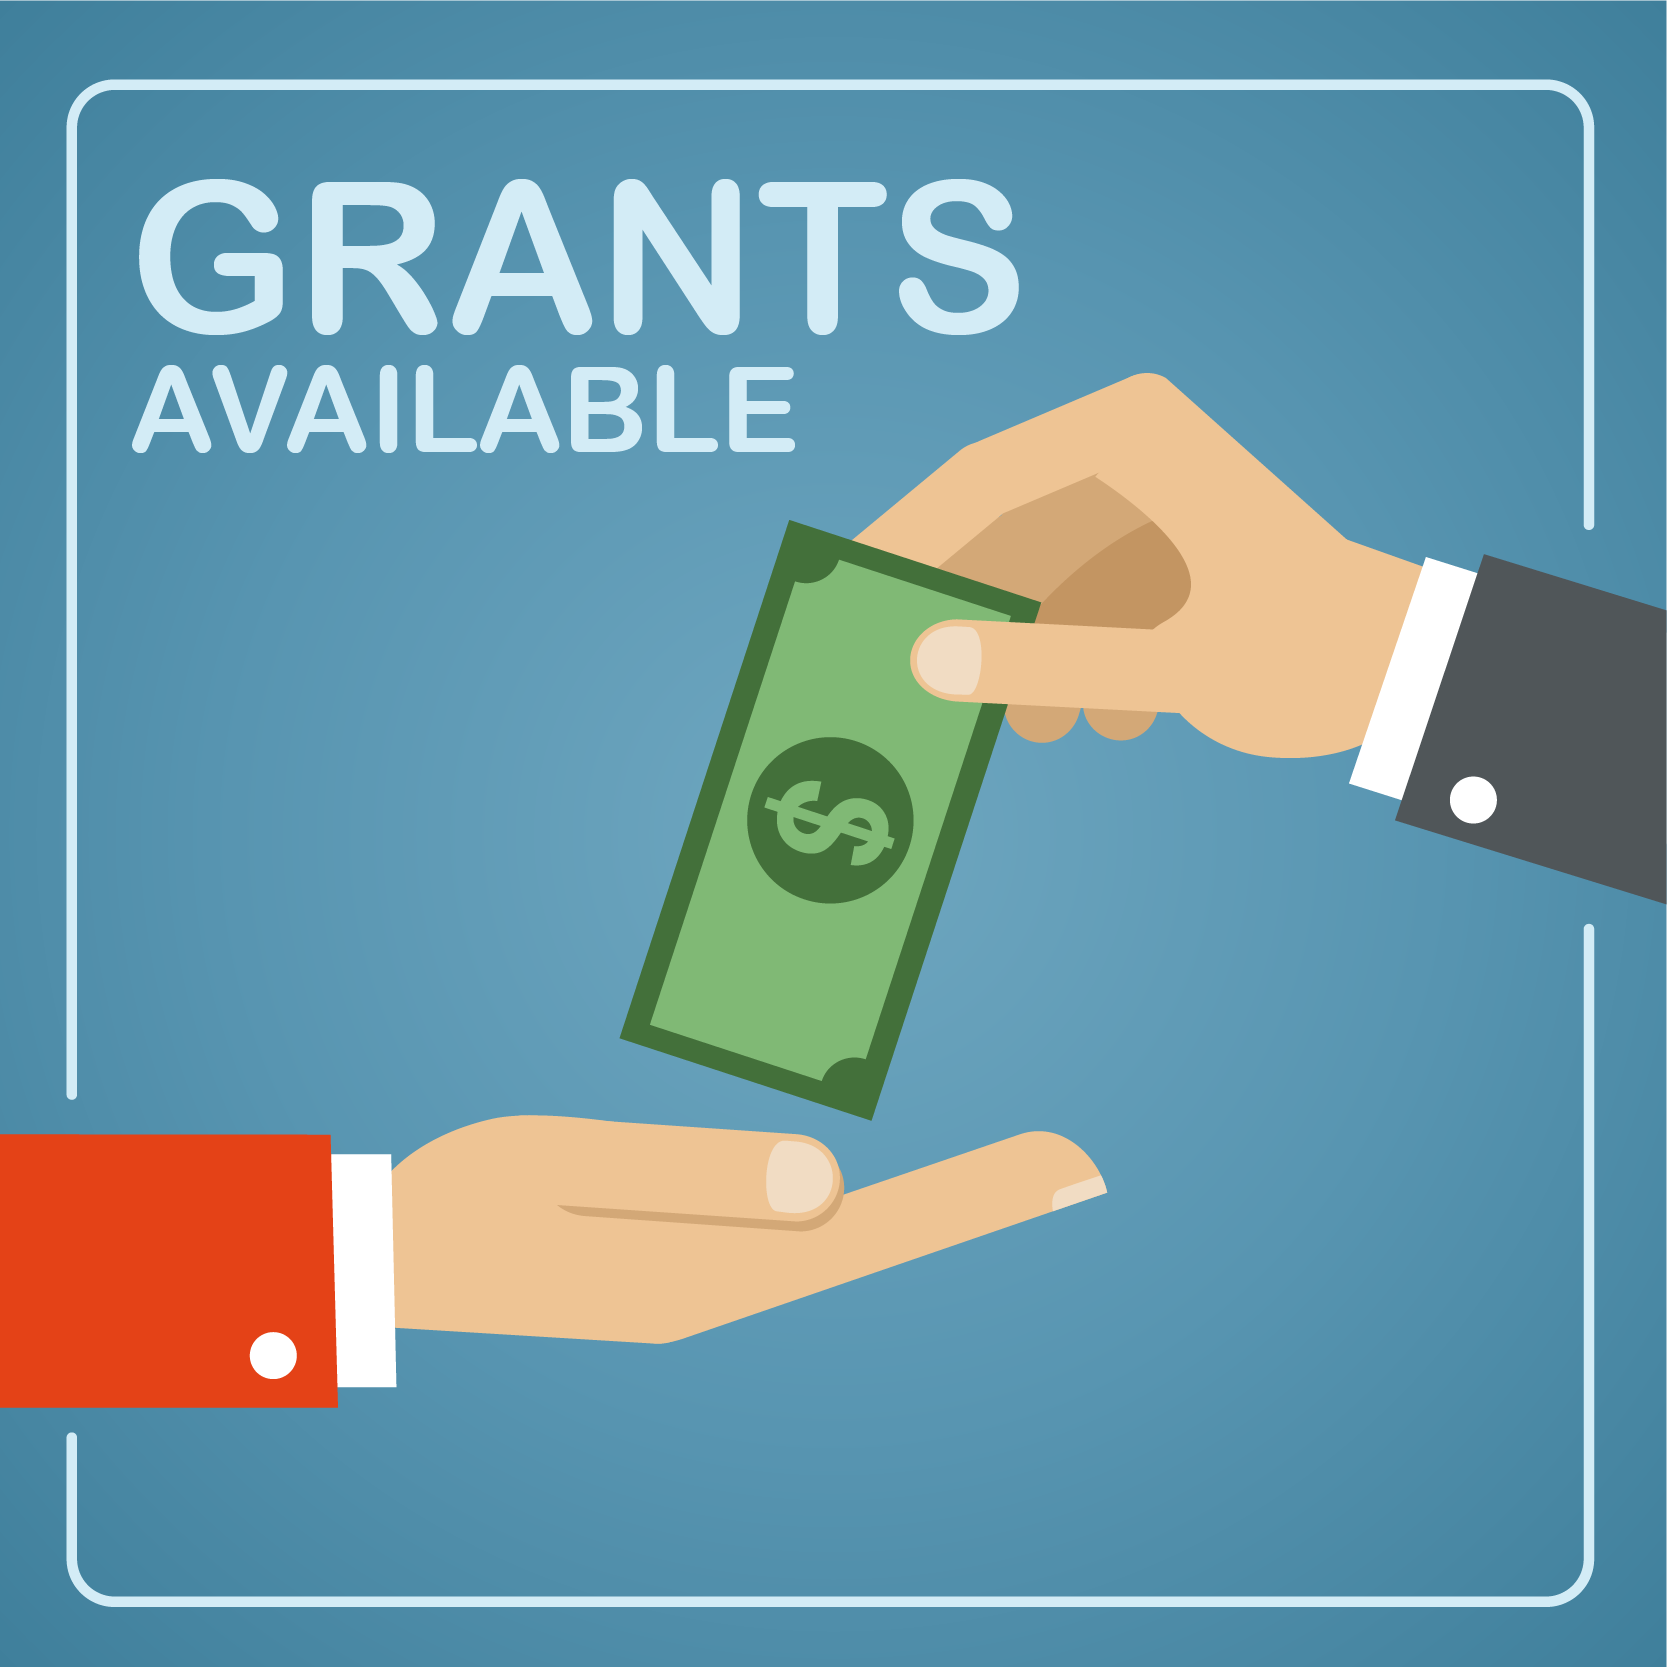 GRANTS_AVAIL.png